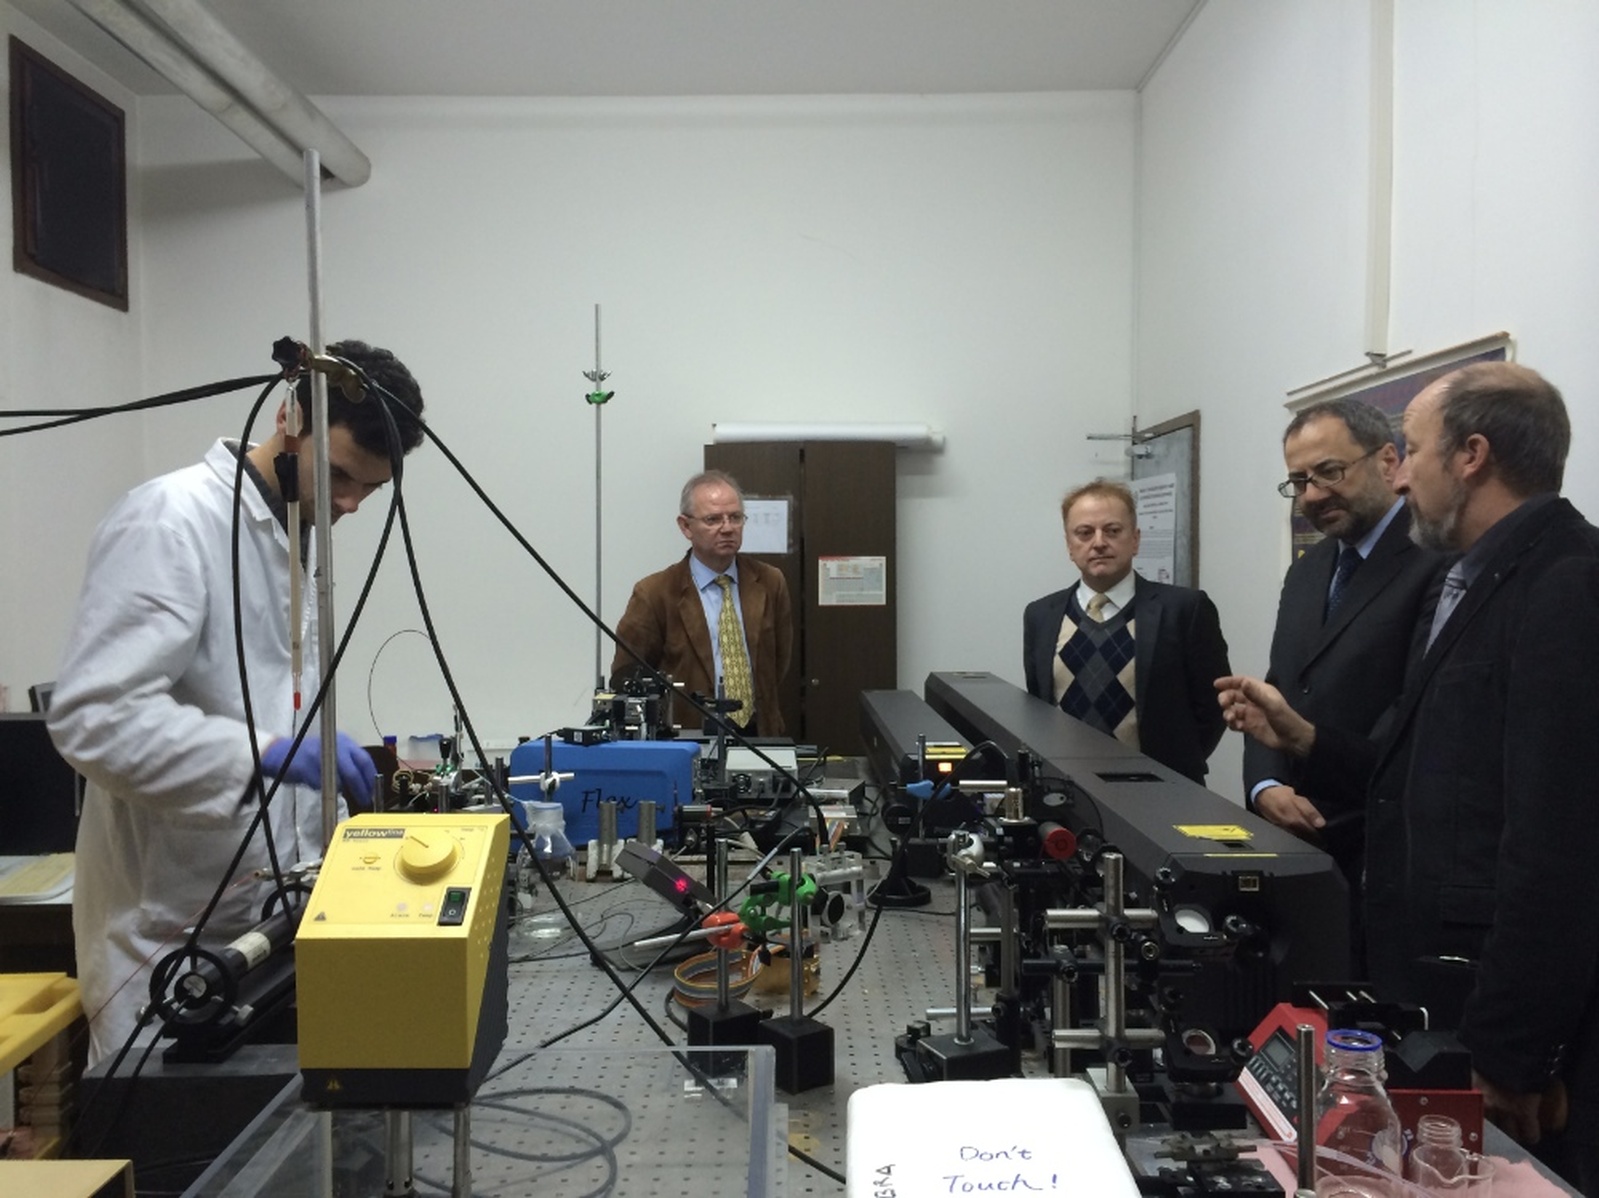 A Visit of the ARRS (Slovenian Research Agency) Director at the University of Nova Gorica